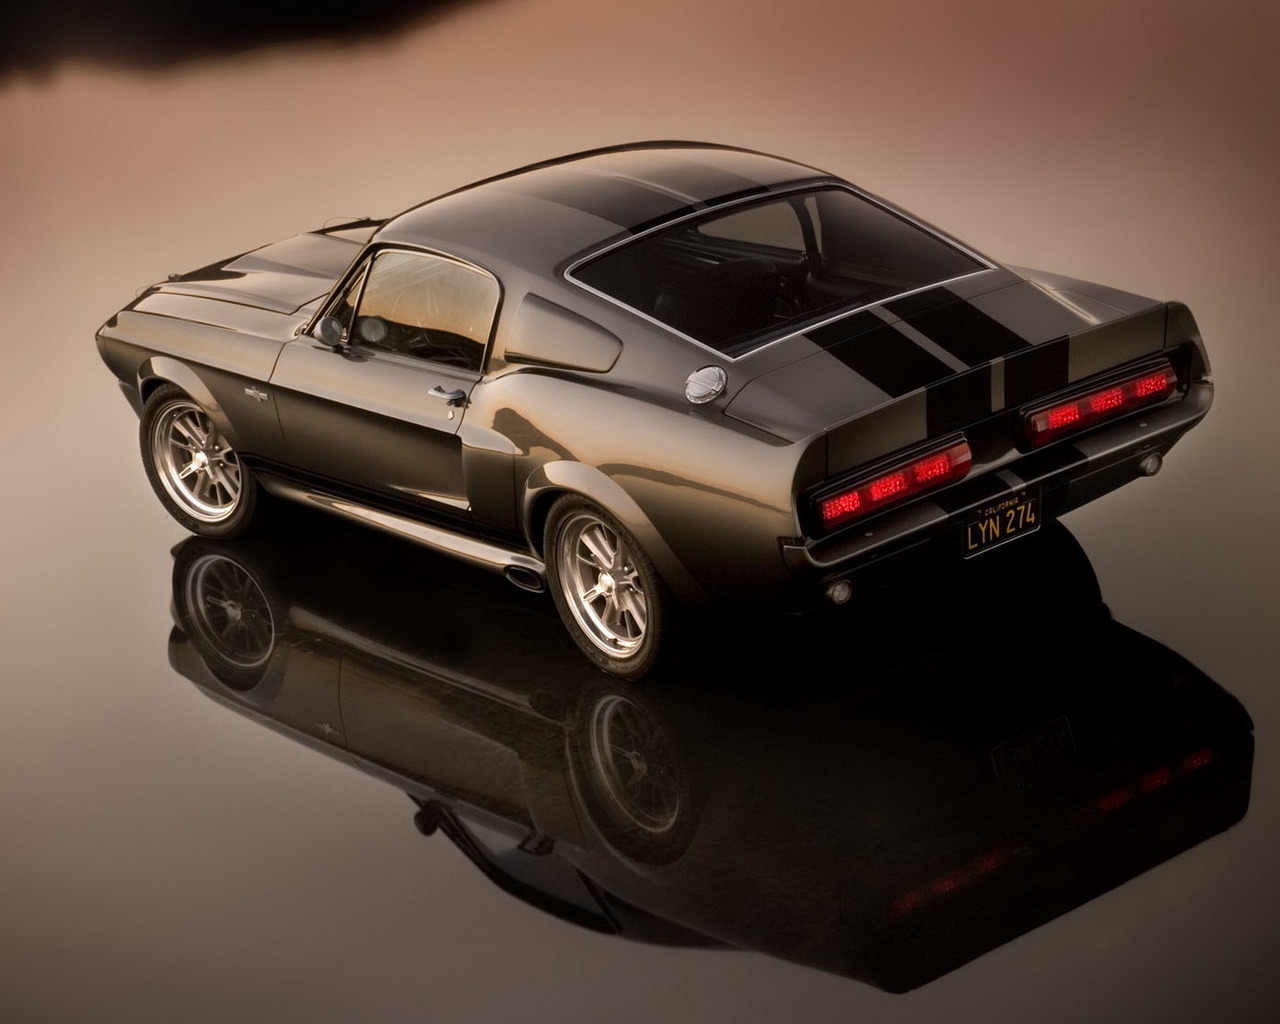 Mustang GT500 for 1280 x 1024 resolution